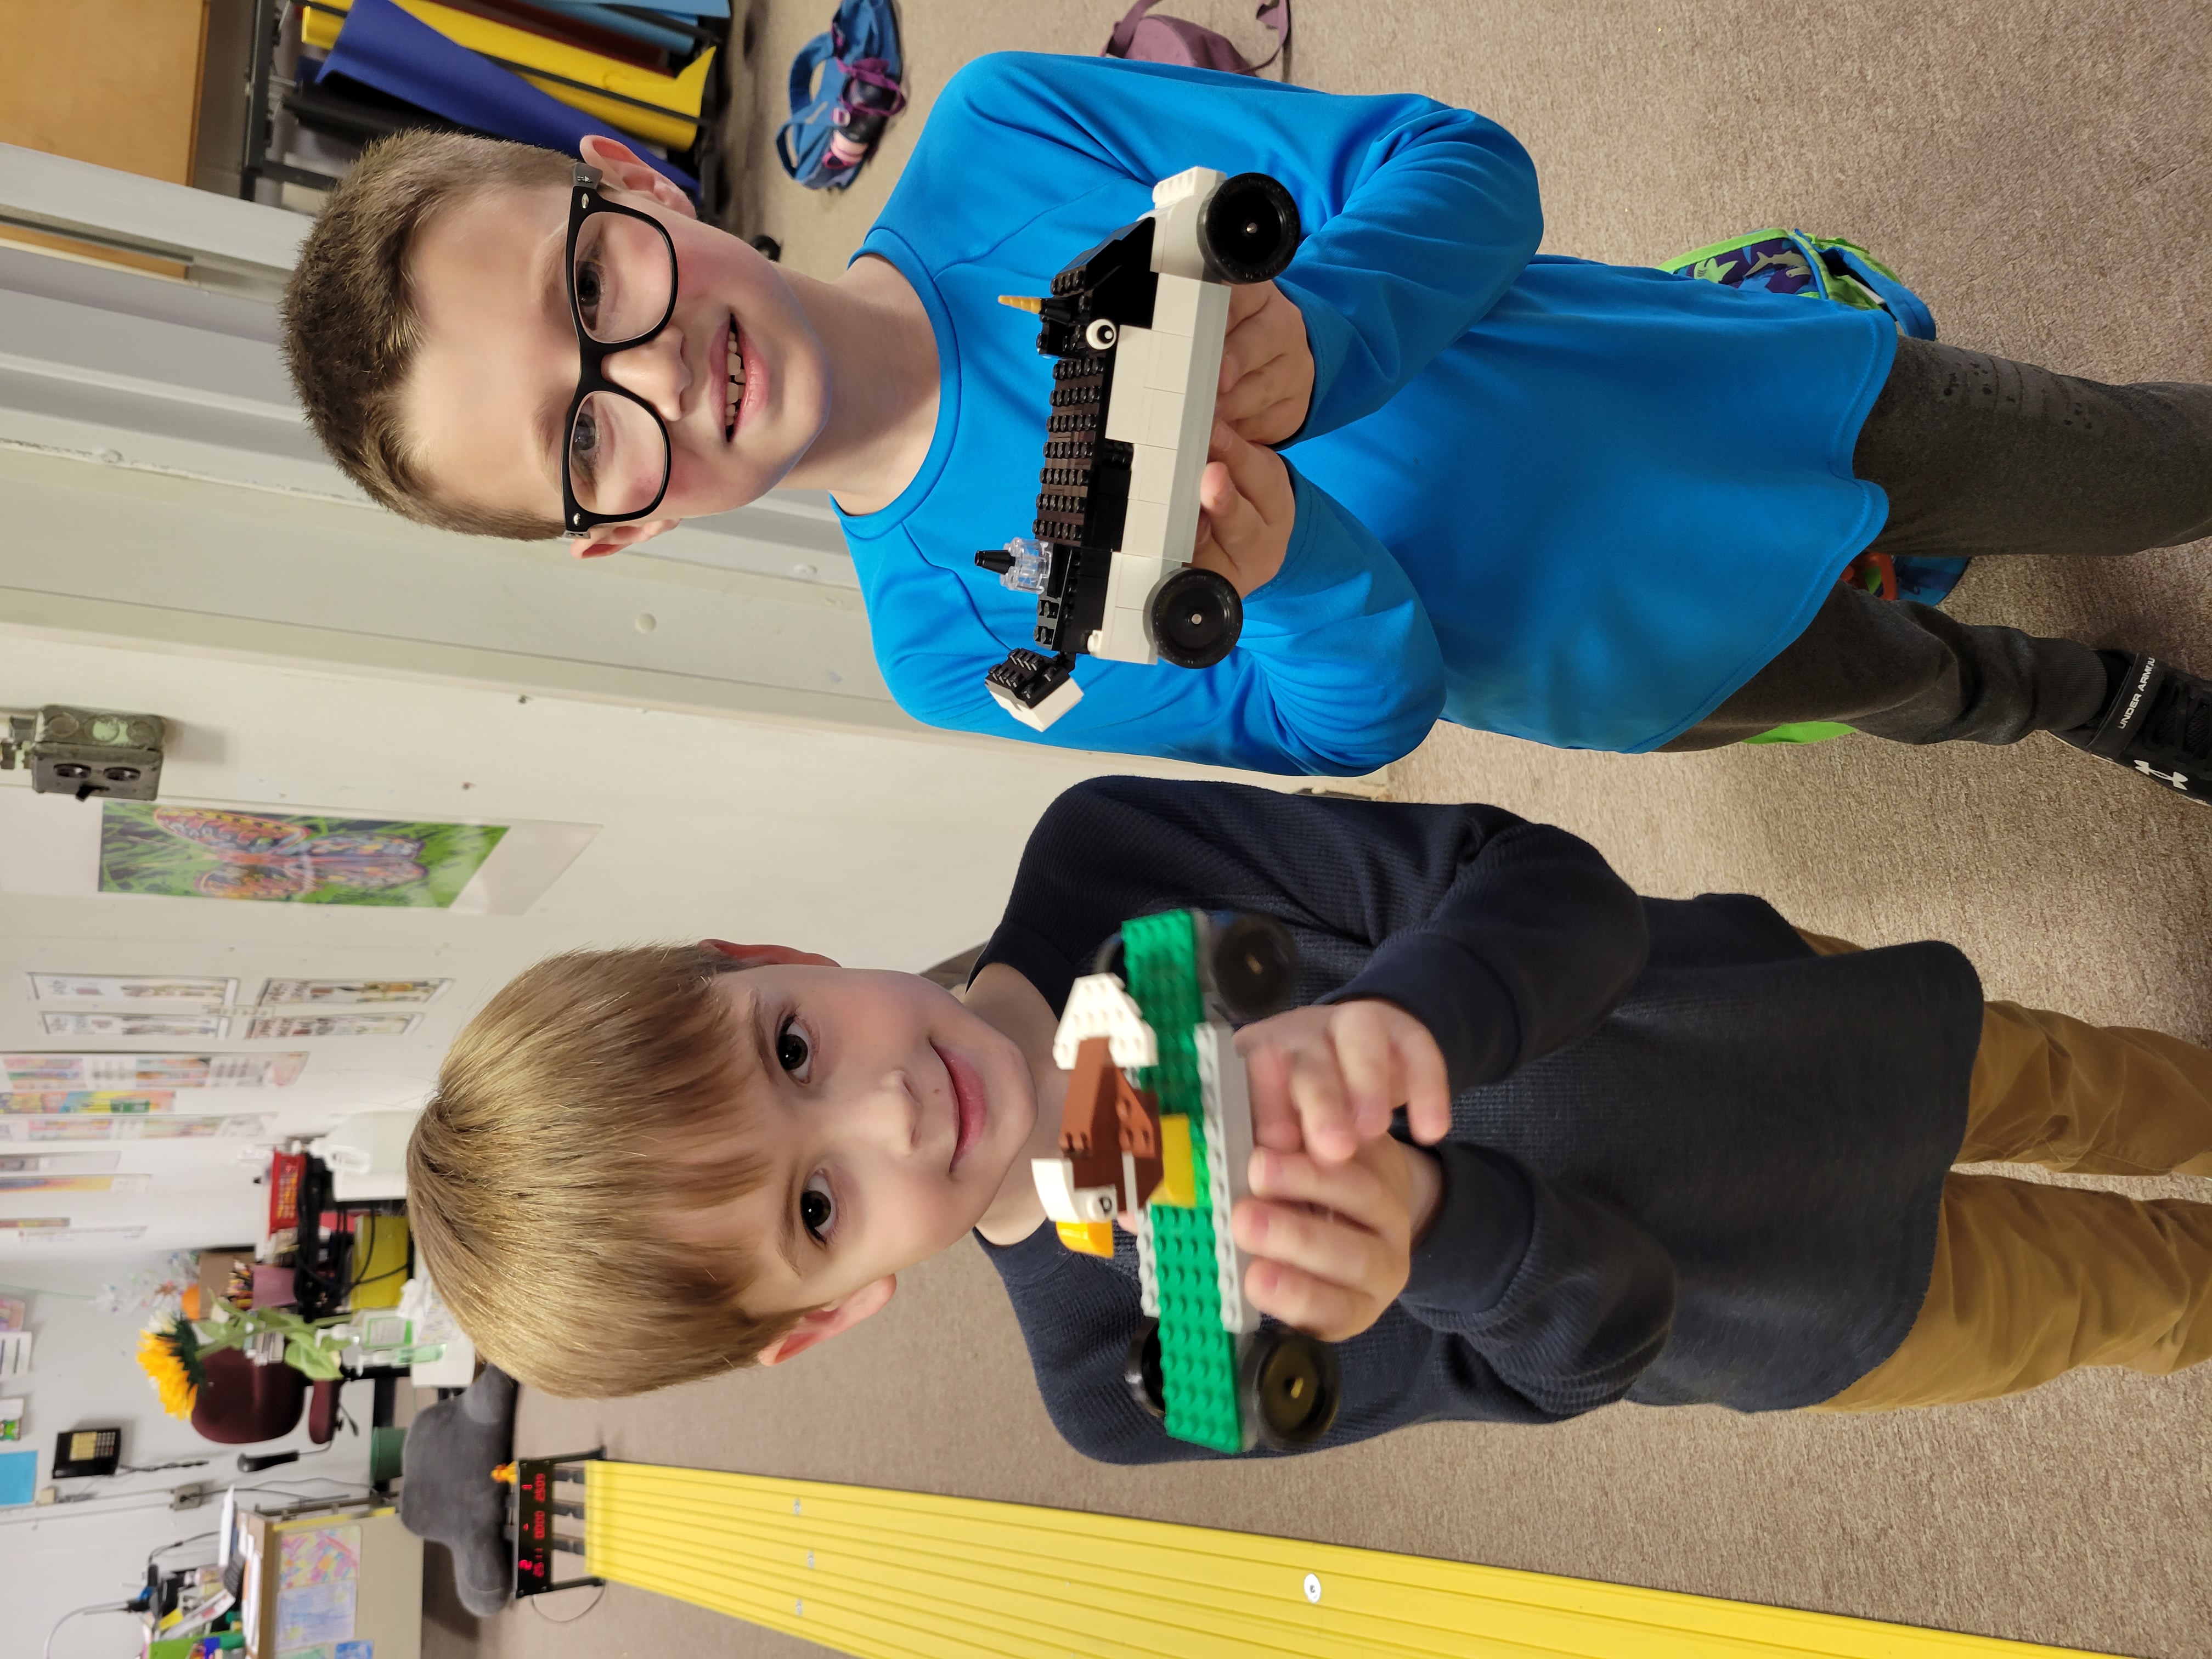 Two students hold the Lego cars they built. The students look proud and are smiling.